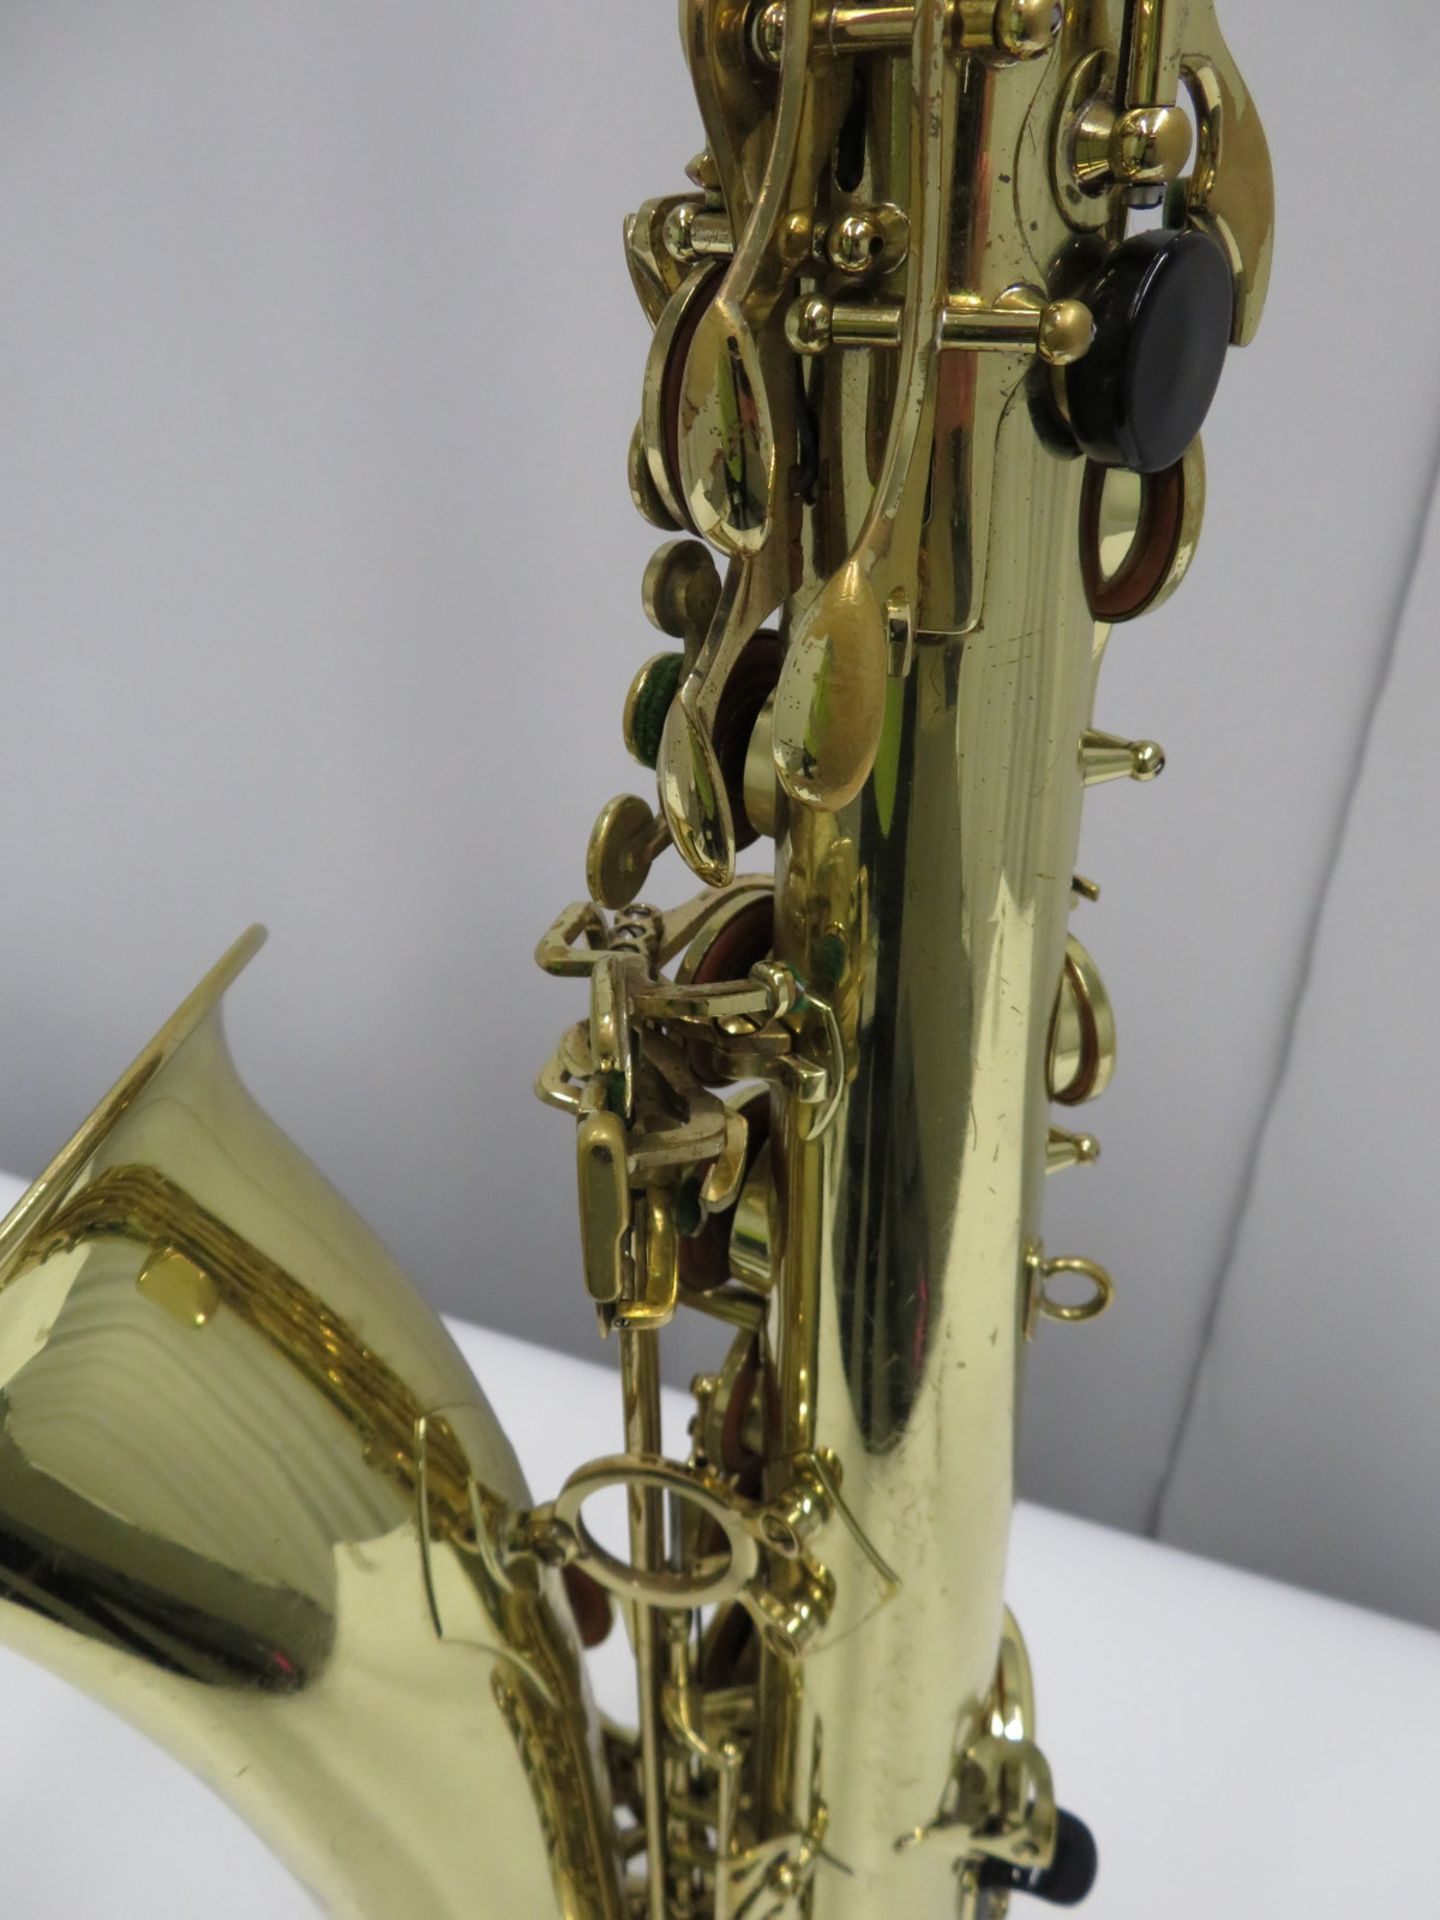 Henri Selmer 80 super action series 2 tenor saxophone with case. Serial number: N.613456. - Image 14 of 17